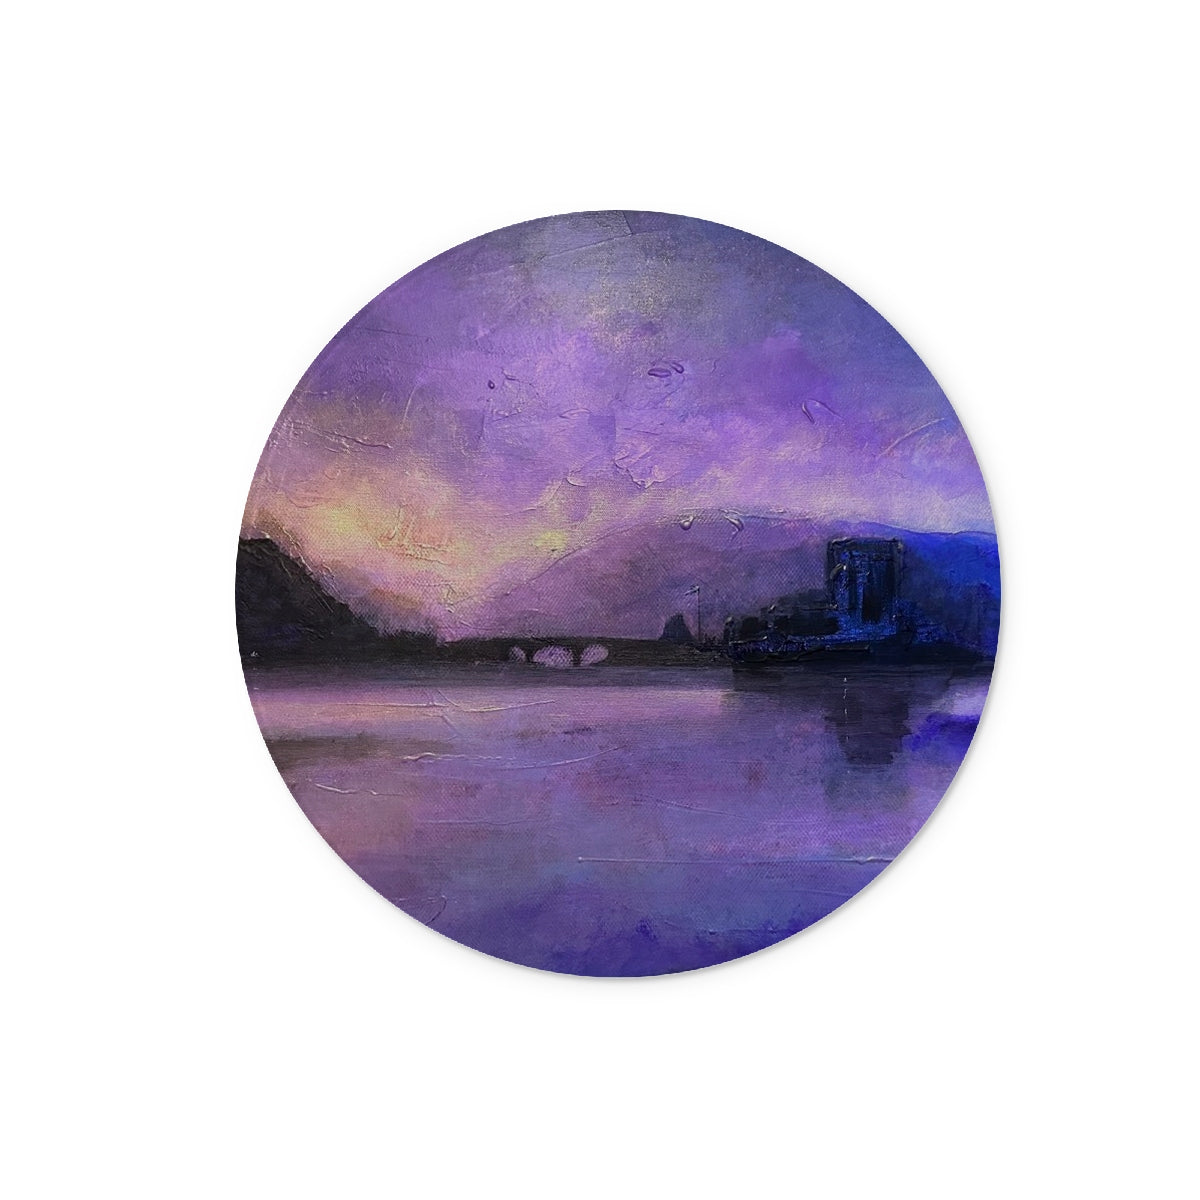 Eilean Donan Castle Moonset Art Gifts Glass Chopping Board-Glass Chopping Boards-Historic & Iconic Scotland Art Gallery-12" Round-Paintings, Prints, Homeware, Art Gifts From Scotland By Scottish Artist Kevin Hunter